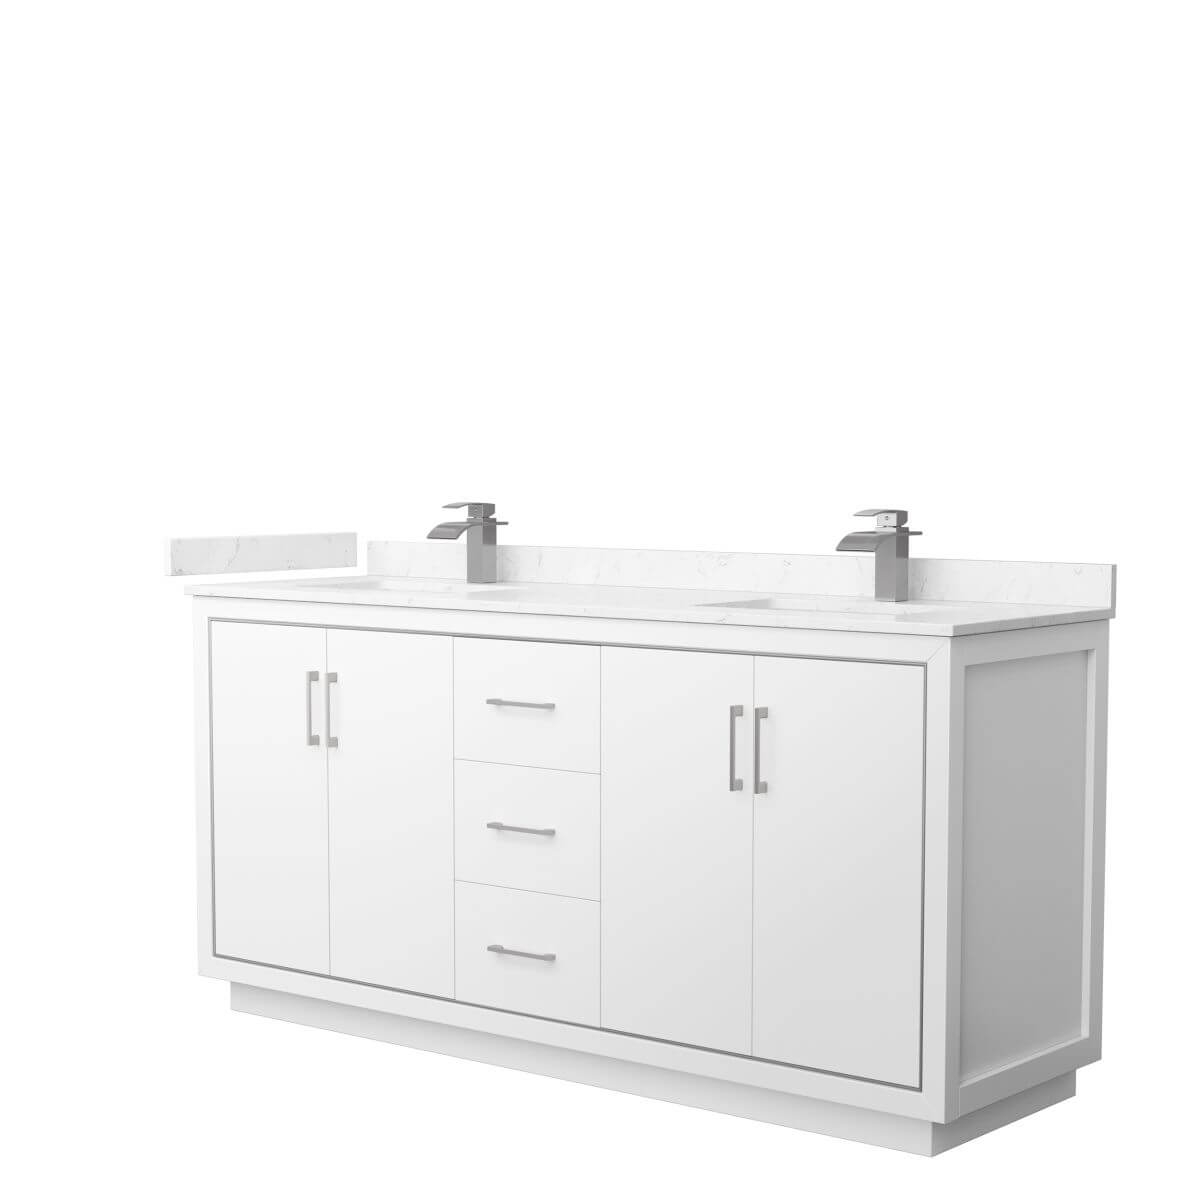 Wyndham Collection WCF111172DWHC2UNSMXX Icon 72 inch Double Bathroom Vanity in White with Carrara Cultured Marble Countertop, Undermount Square Sinks and Brushed Nickel Trim